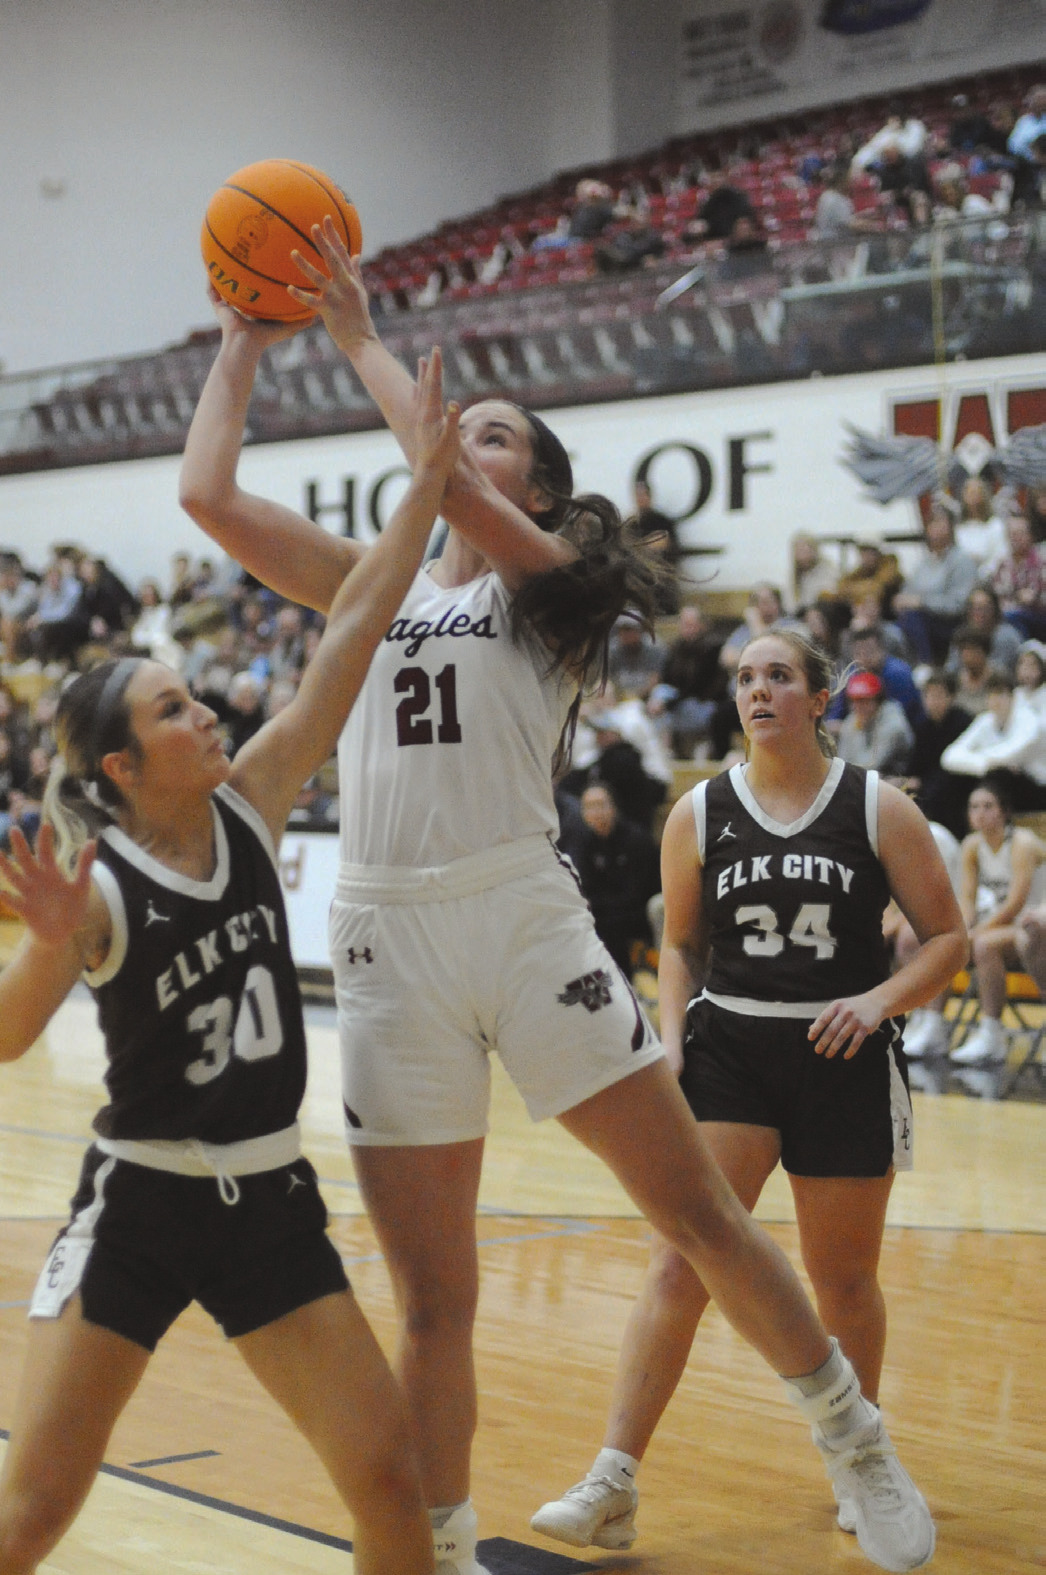 Brinlee Glassey scores two of her 11 points during Friday’s game against Elk City. Josh Burton/WDN